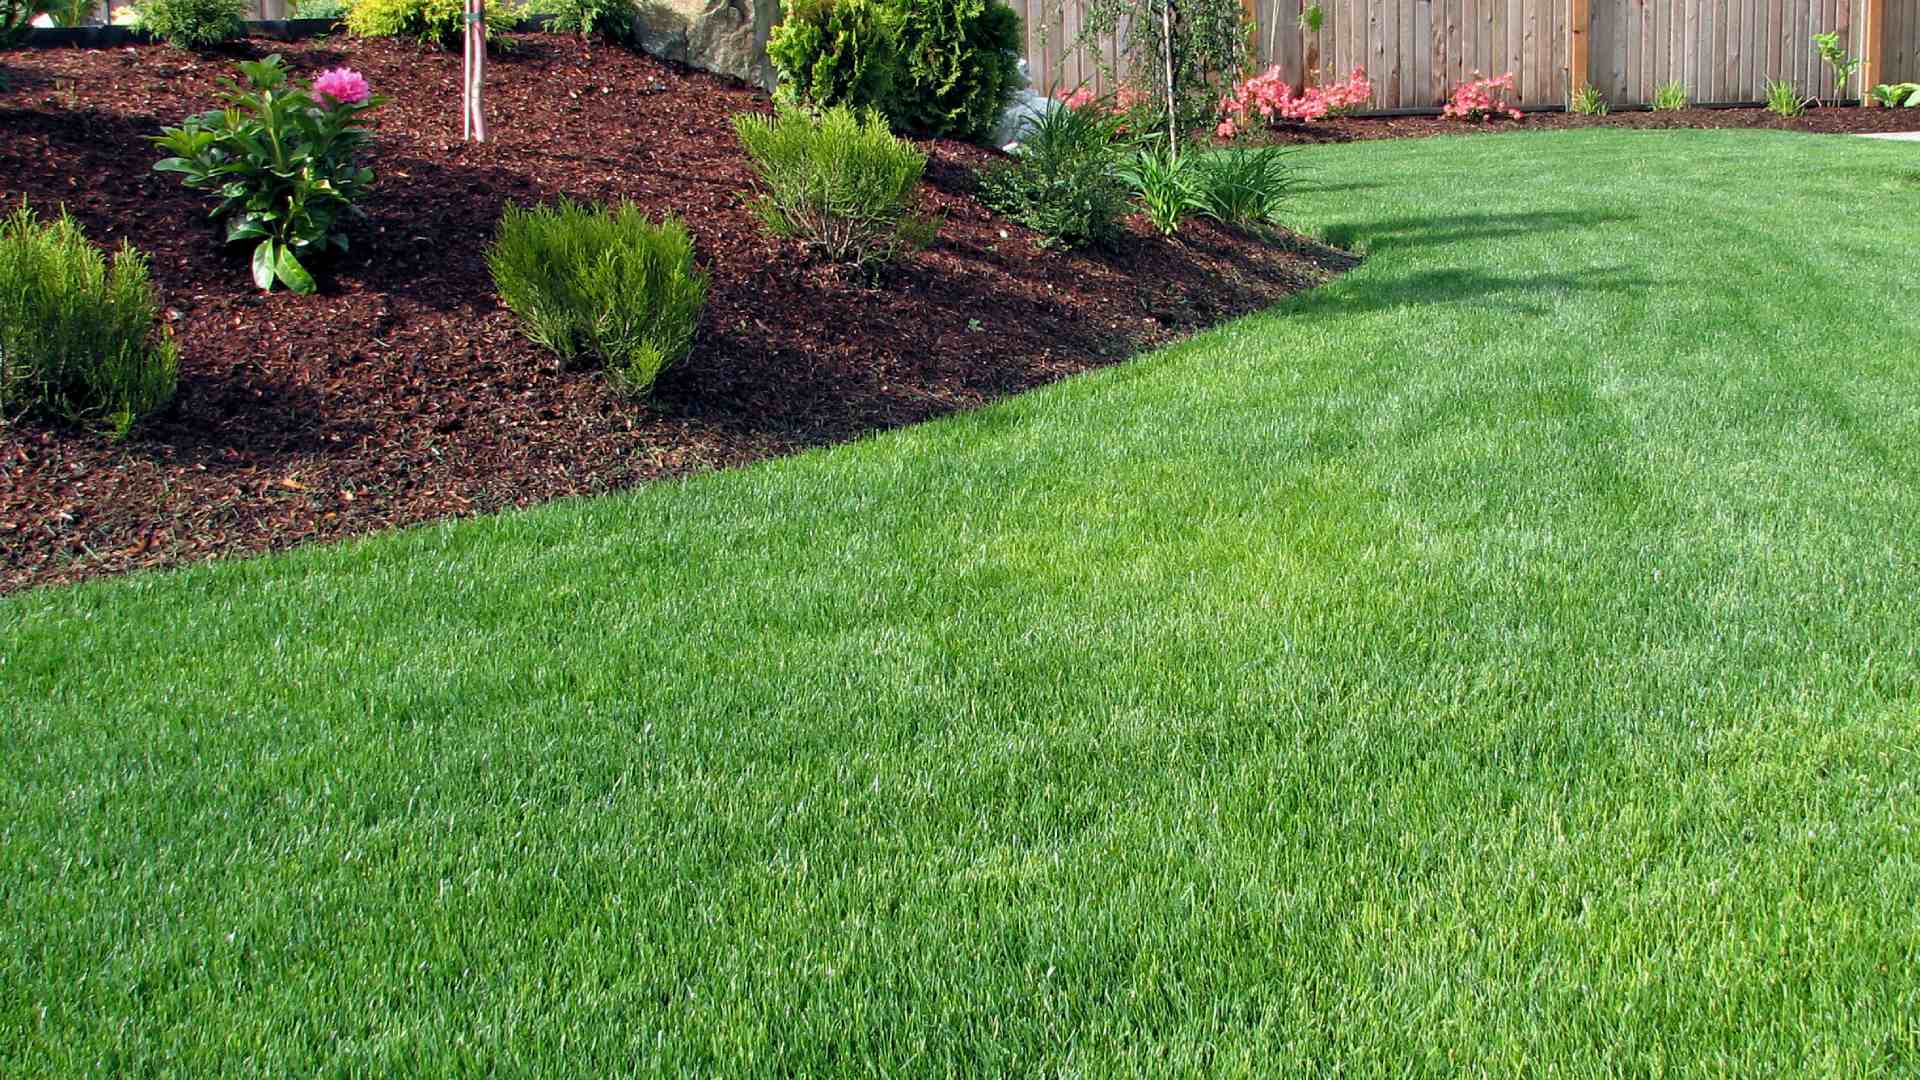 Maintained lawn after services with Cititurf in Plano, TX.